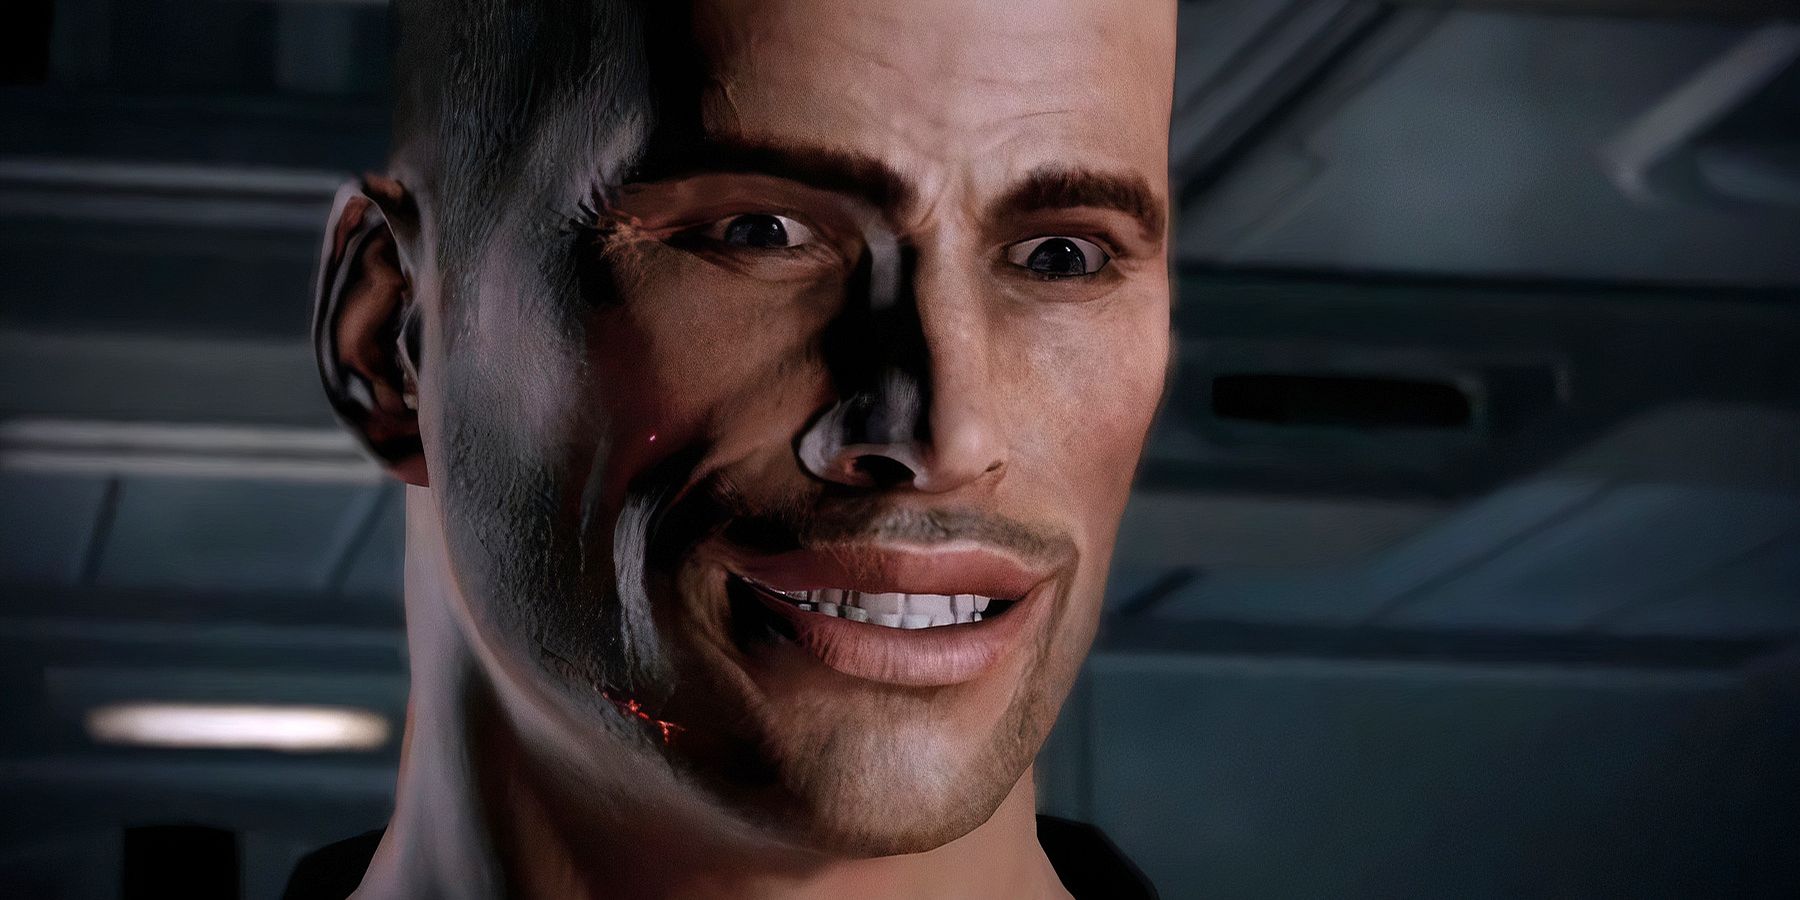 mass-effect-shepard-with-a-goofy-smile.jpg